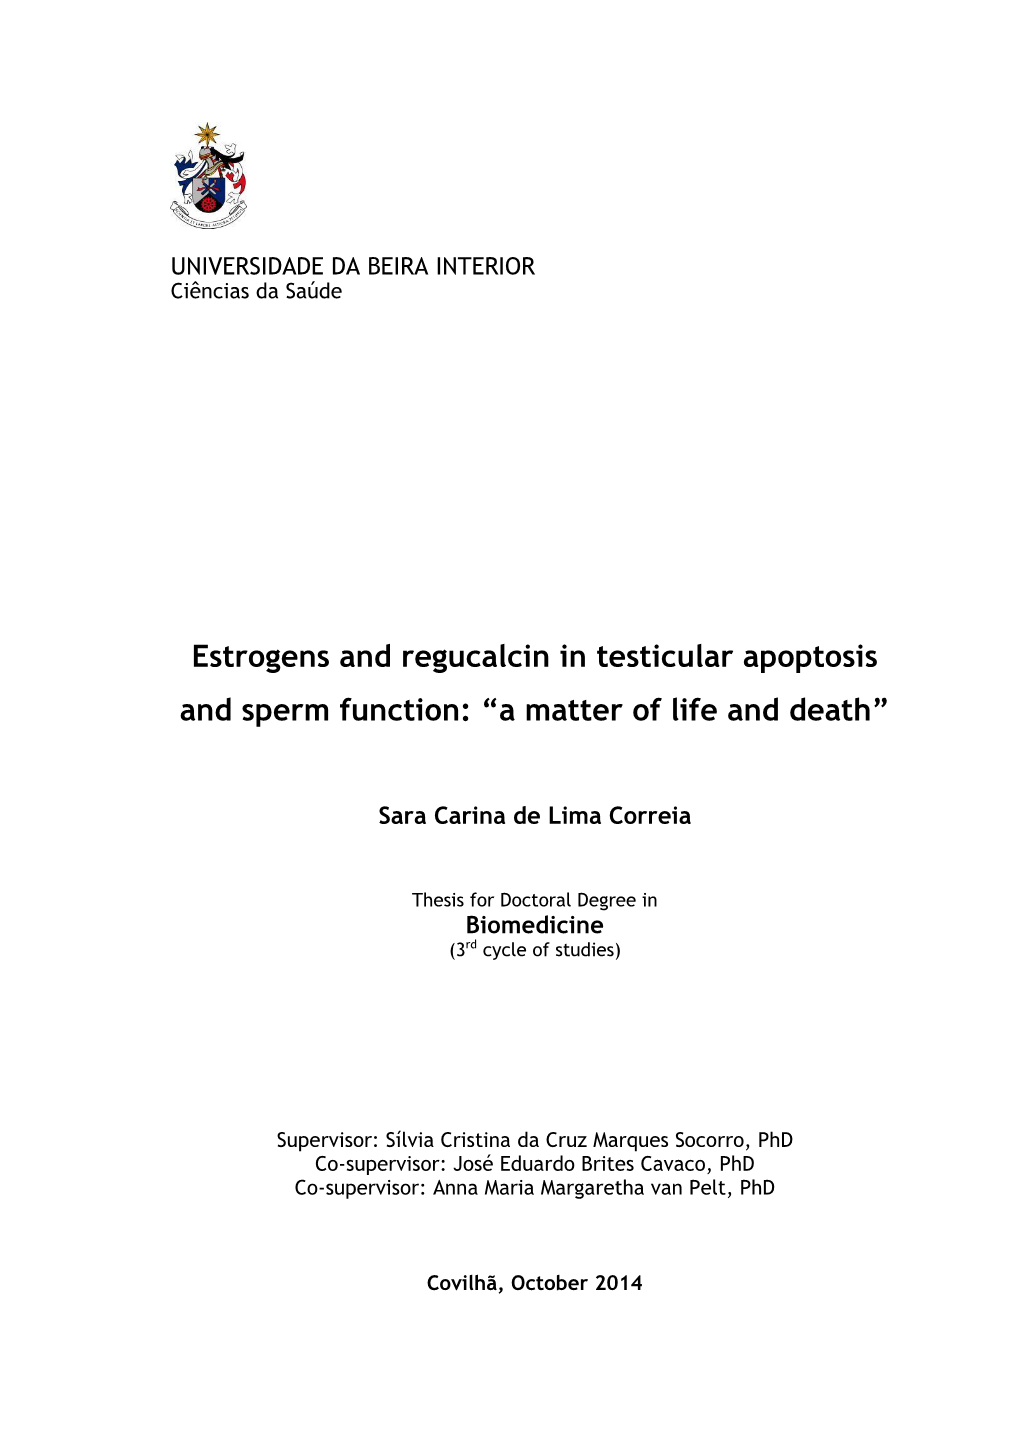 Estrogens and Regucalcin in Testicular Apoptosis and Sperm Function: “A Matter of Life and Death”